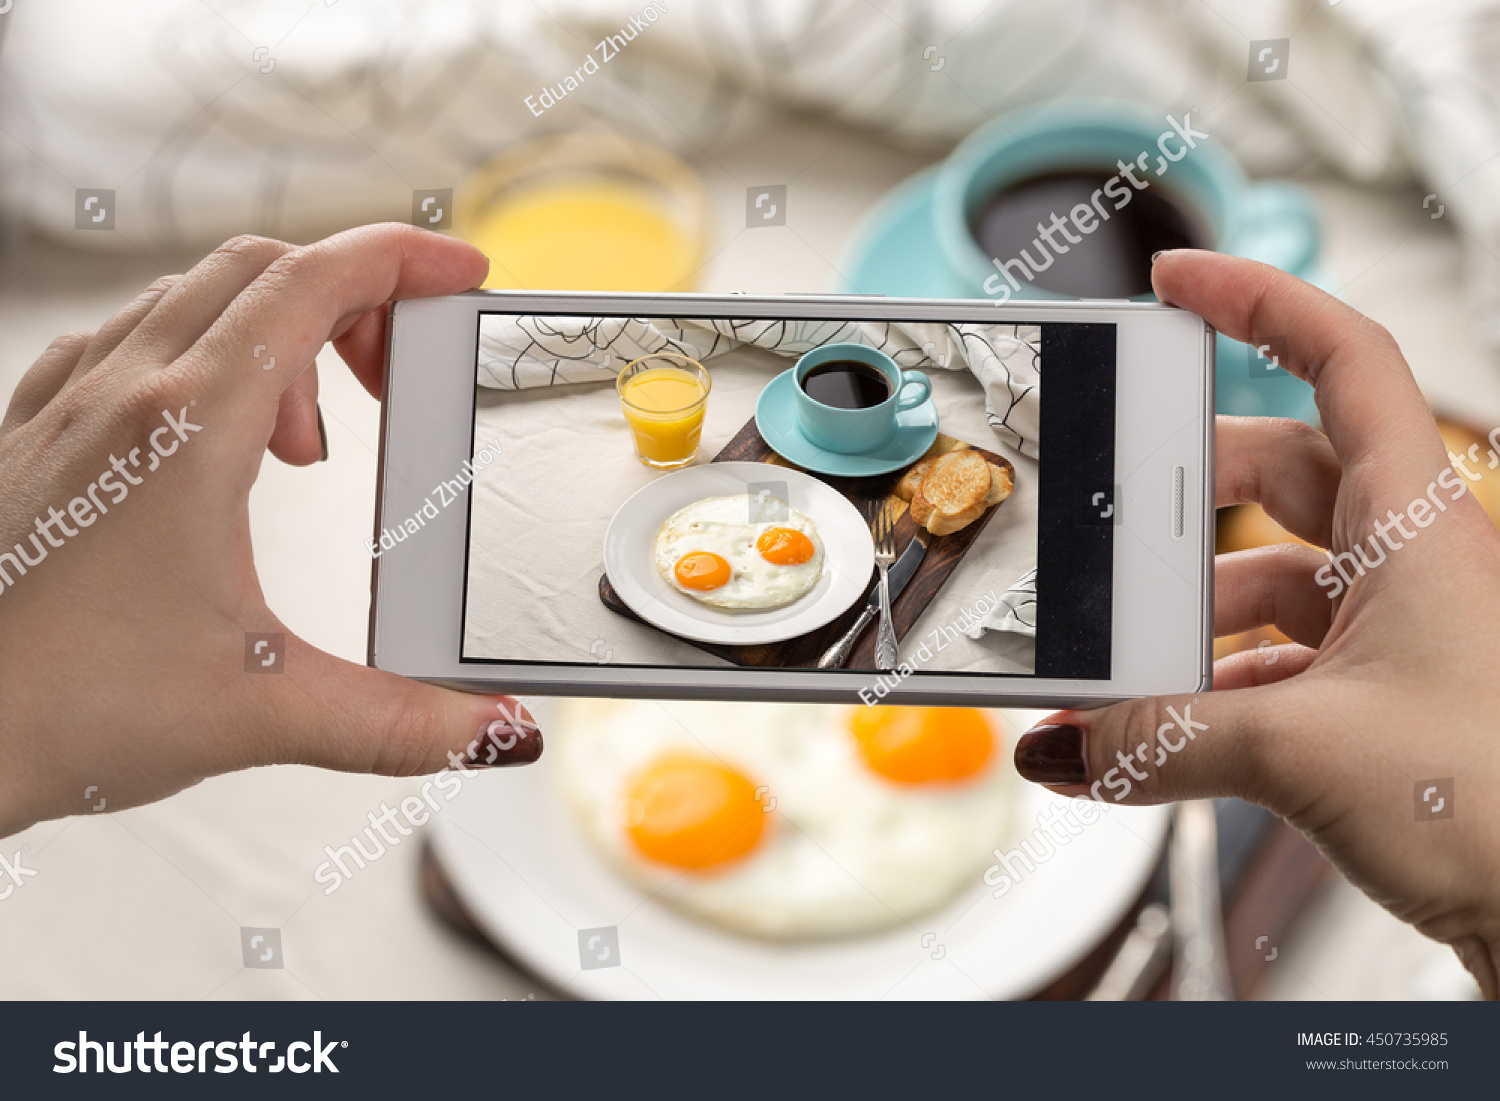 Woman using smartphone to take photos of her breakfast #450735985